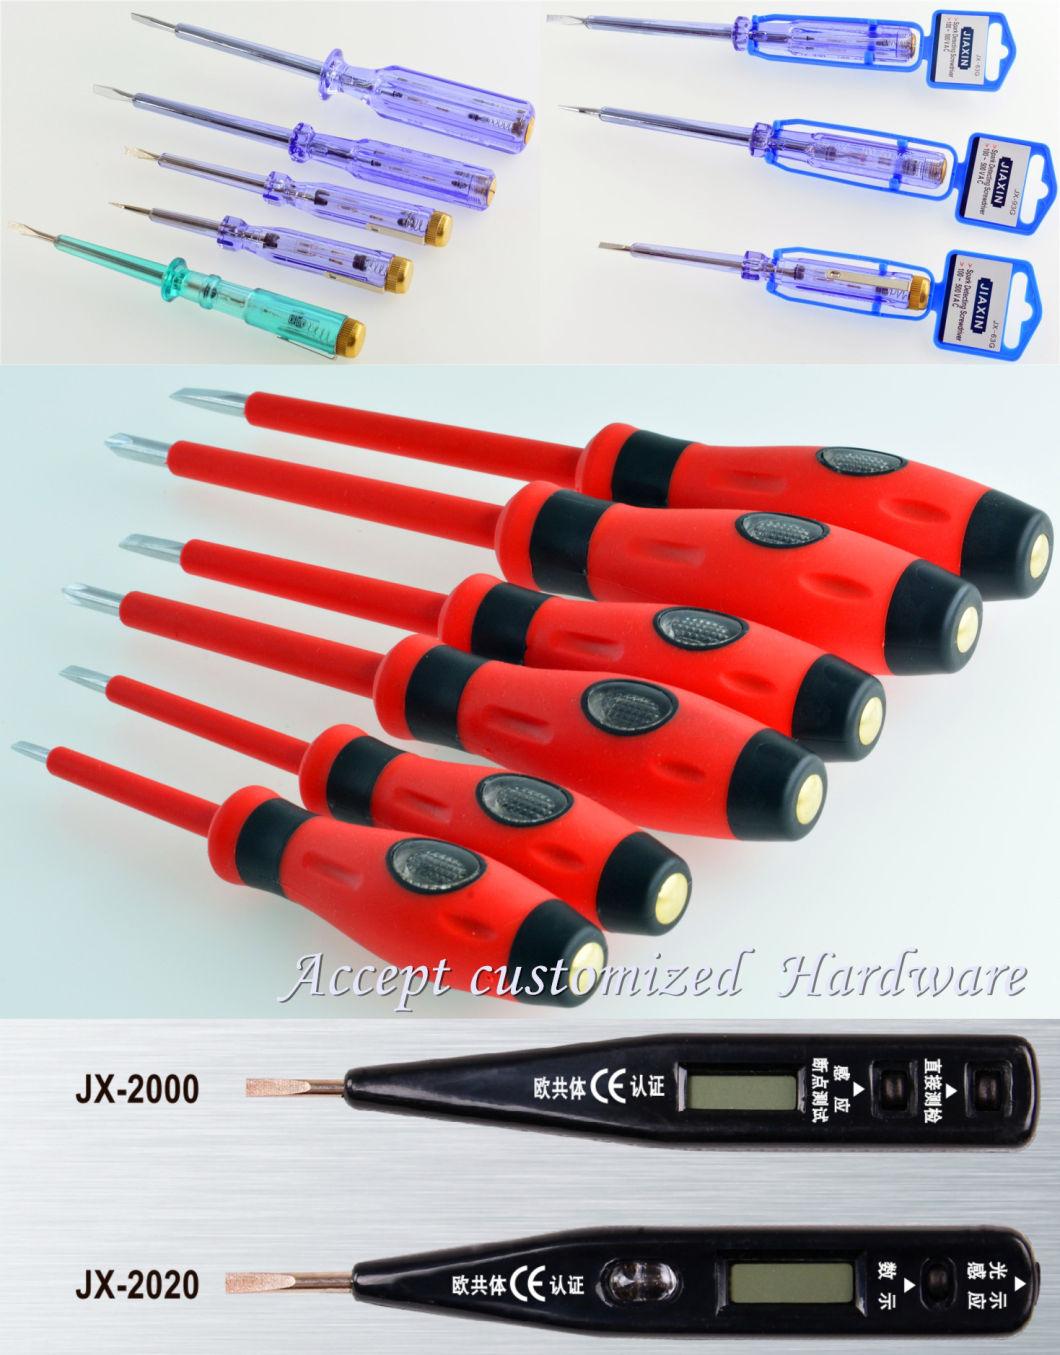 Multifunctional Screwdriver with Magnetic Slotted and Electricians Electrical Work Repair Tool Kit Screwdriver Set